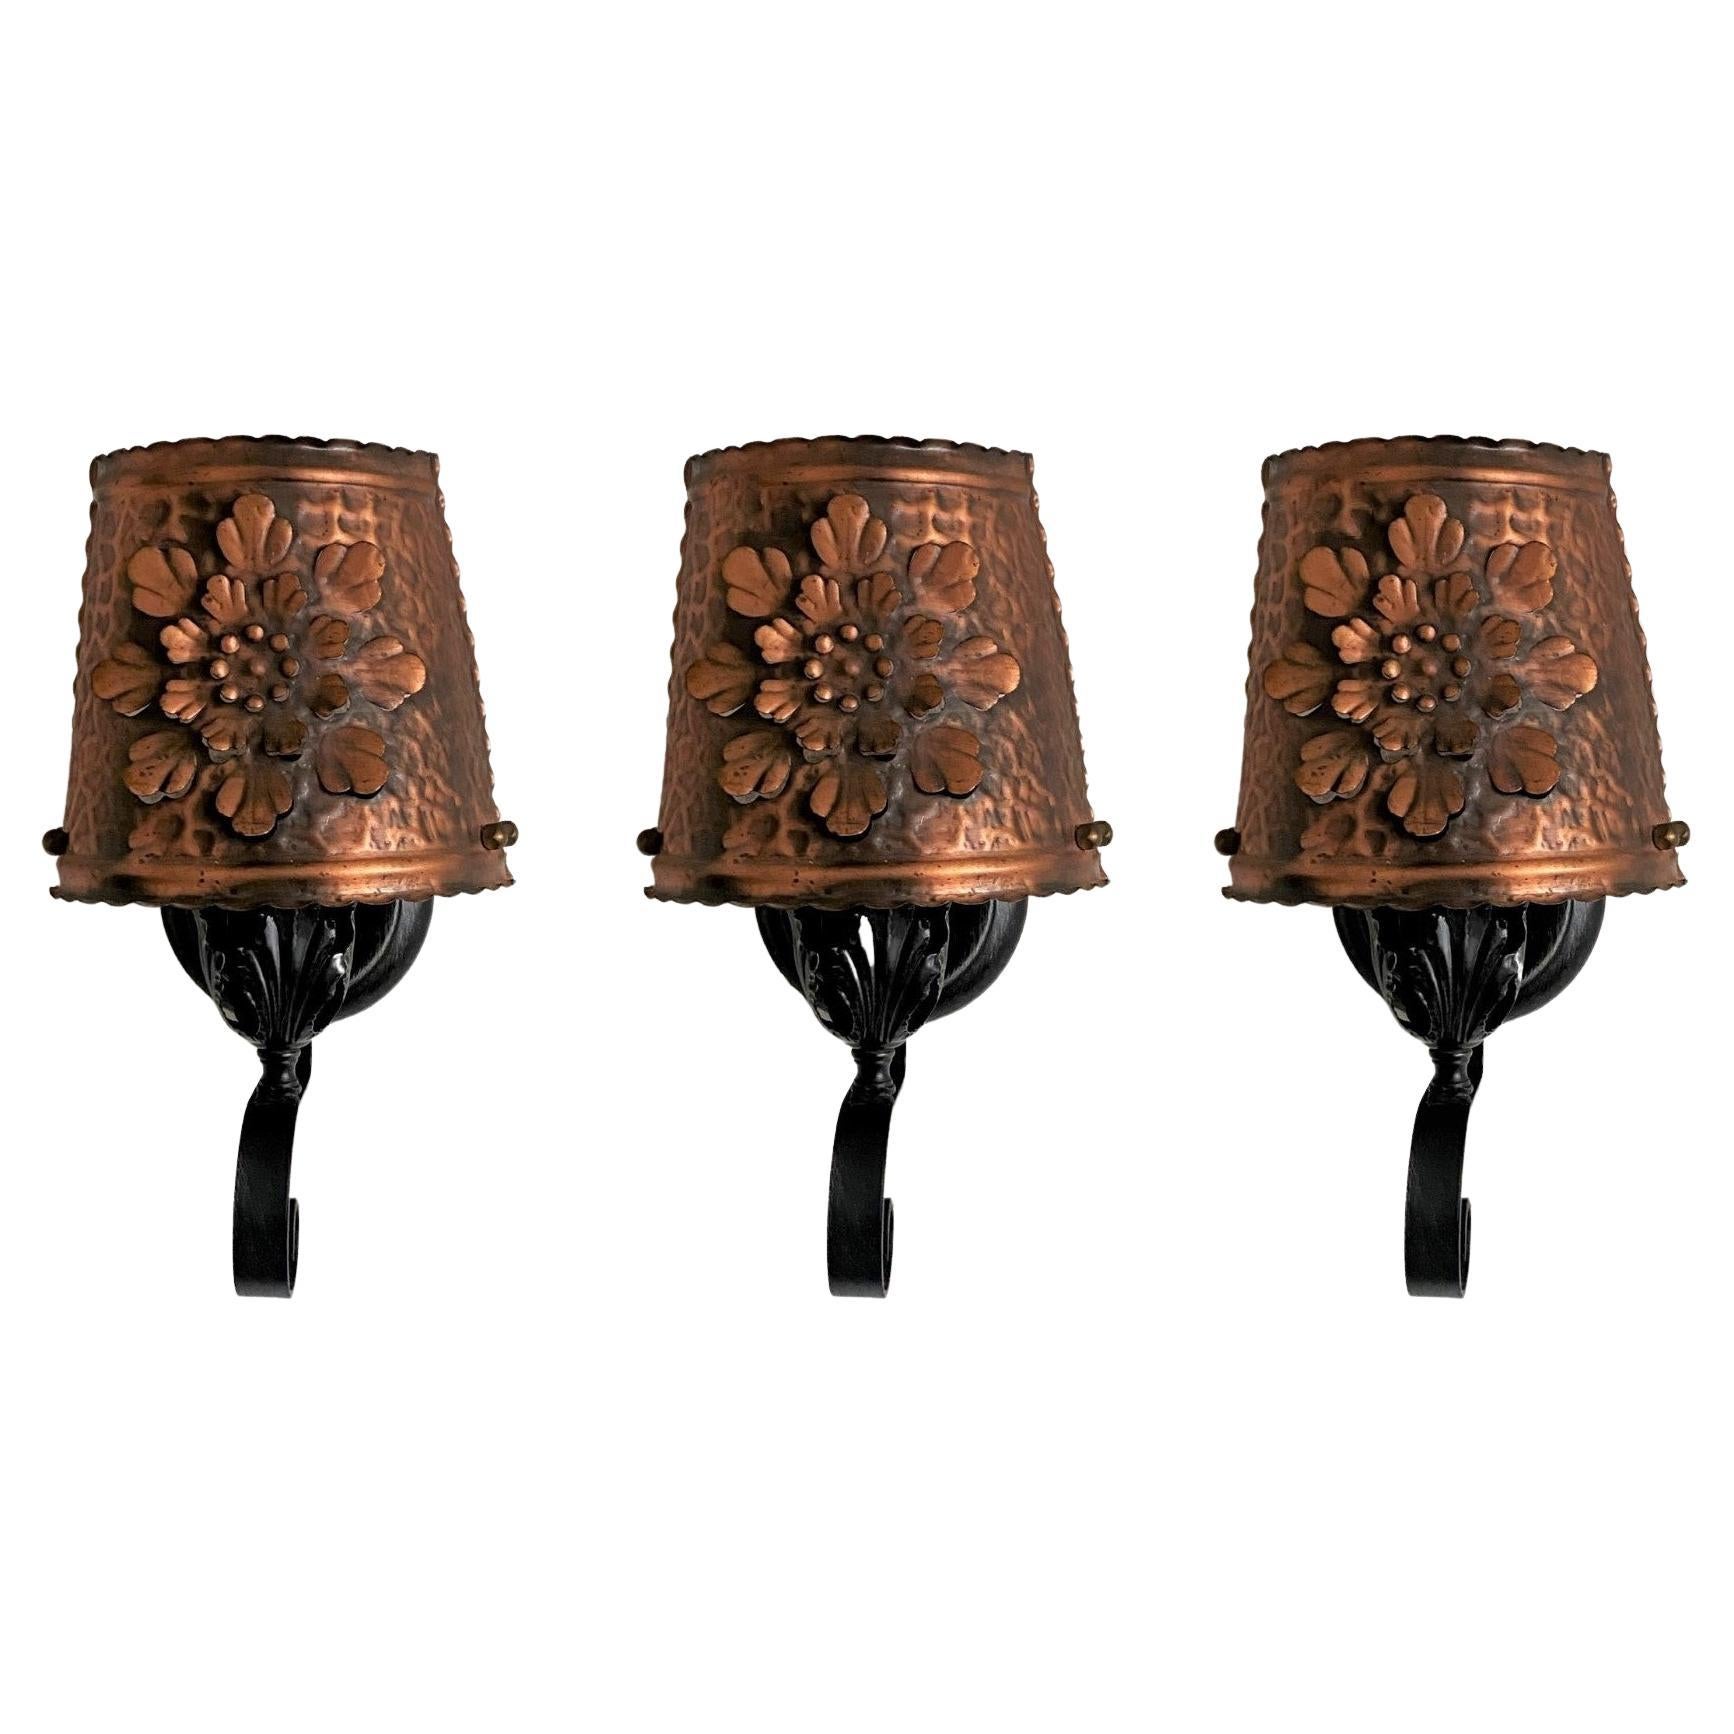 Set of Three Midcentury Spanish Wrought Iron Pierced Copper Wall Sconces, 1950s For Sale